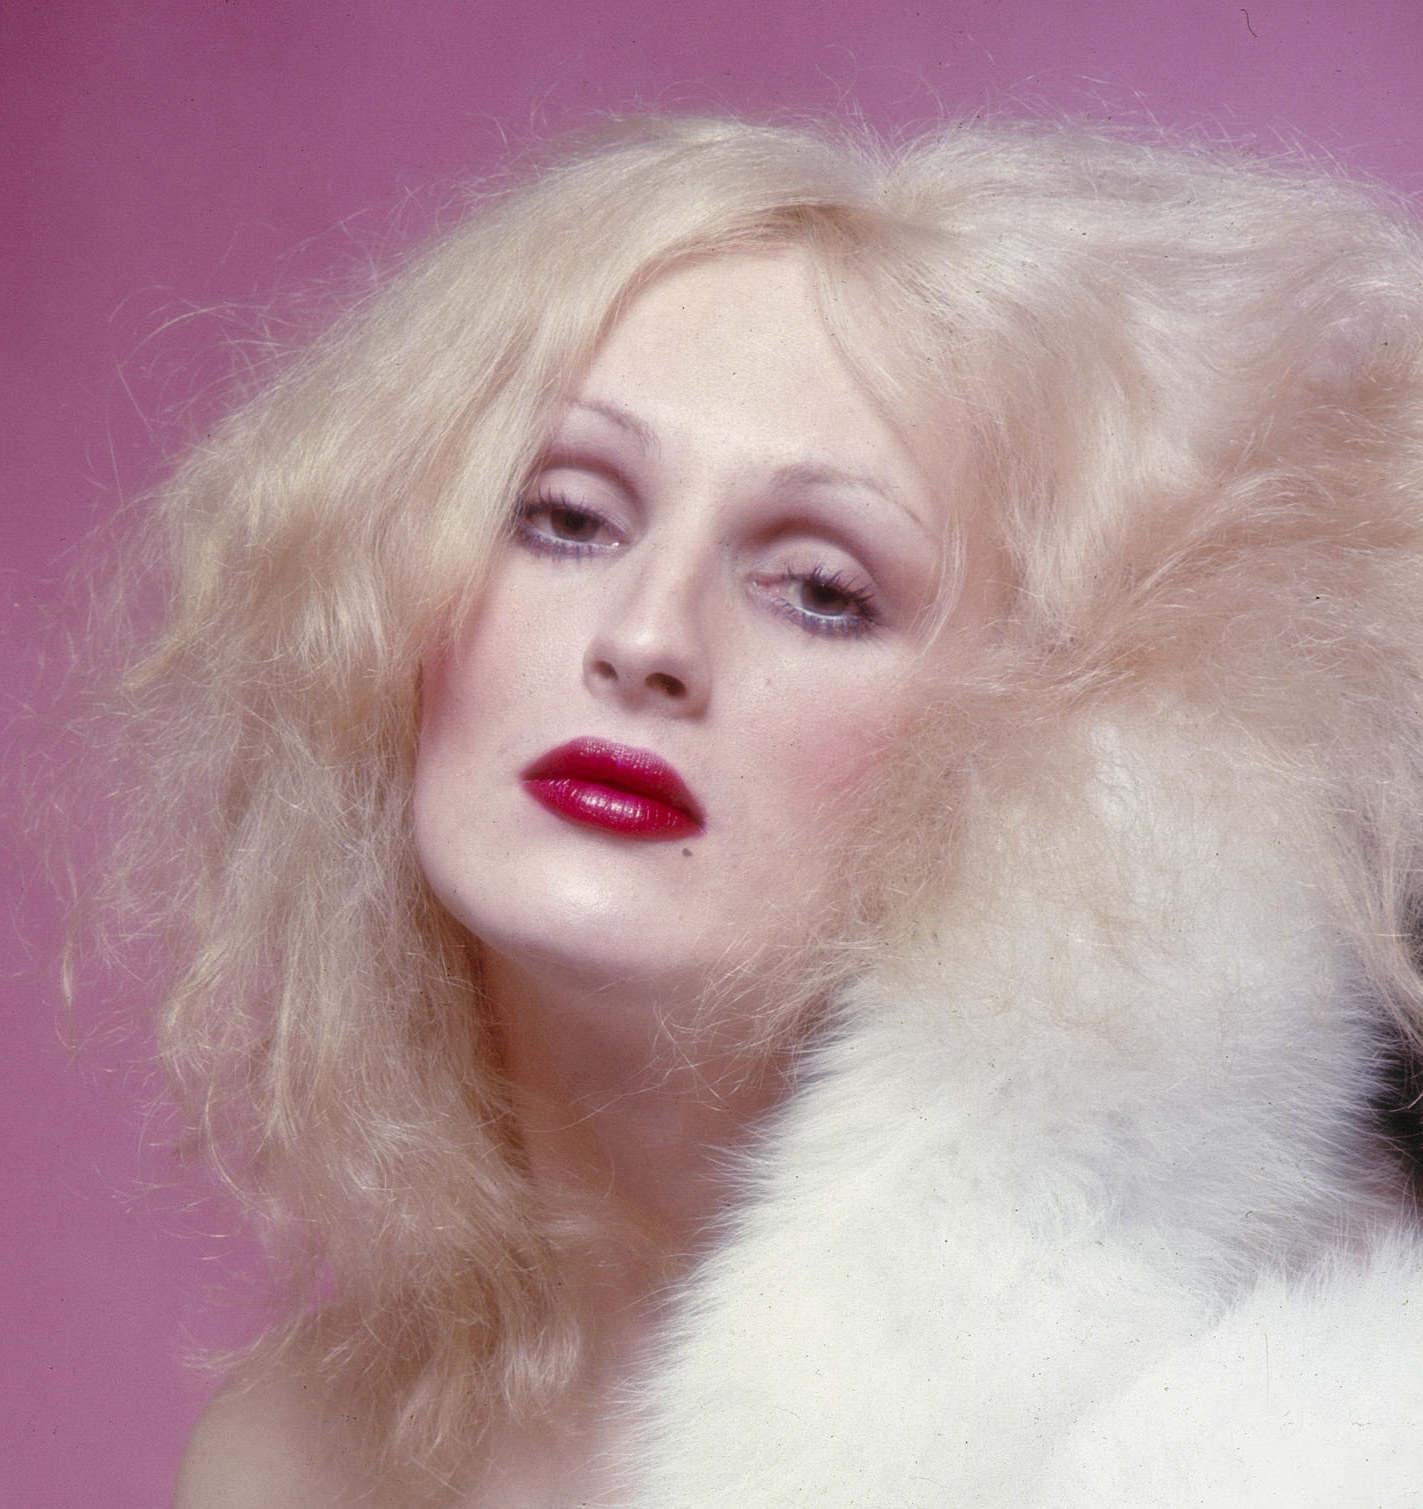 Warhol Superstar Candy Darling star of 'Vain Victory', Color 17 x 22